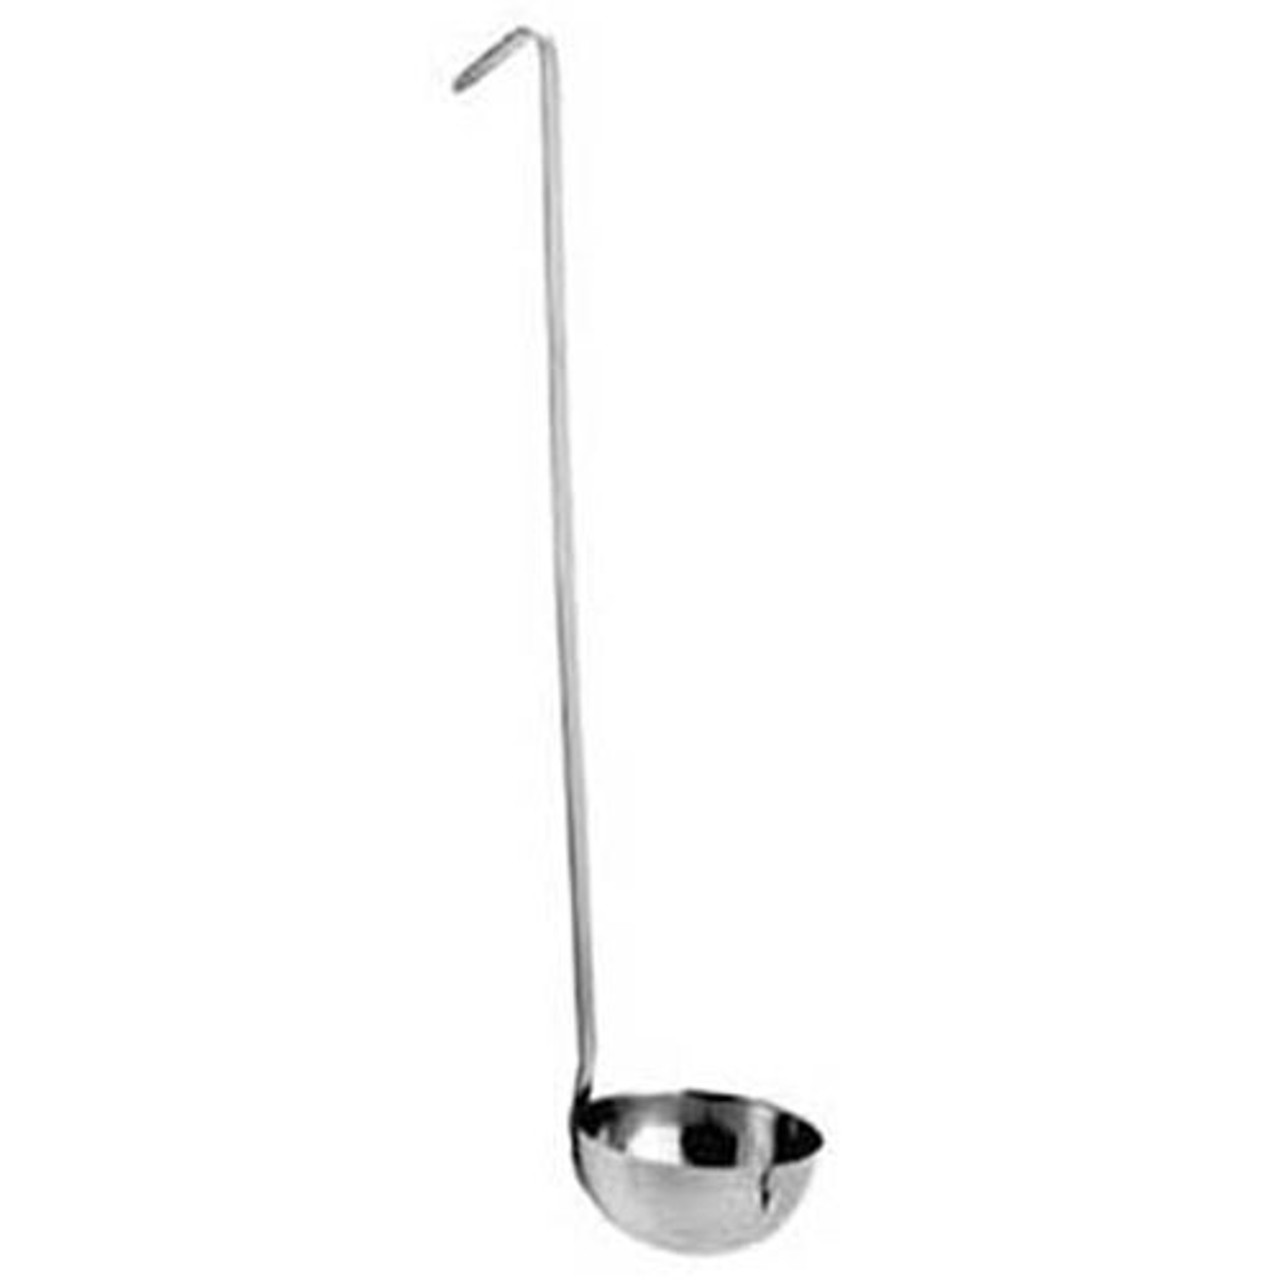 Ladle 4Oz S/S 1-Piece - Replacement Part For Star Mfg 21700